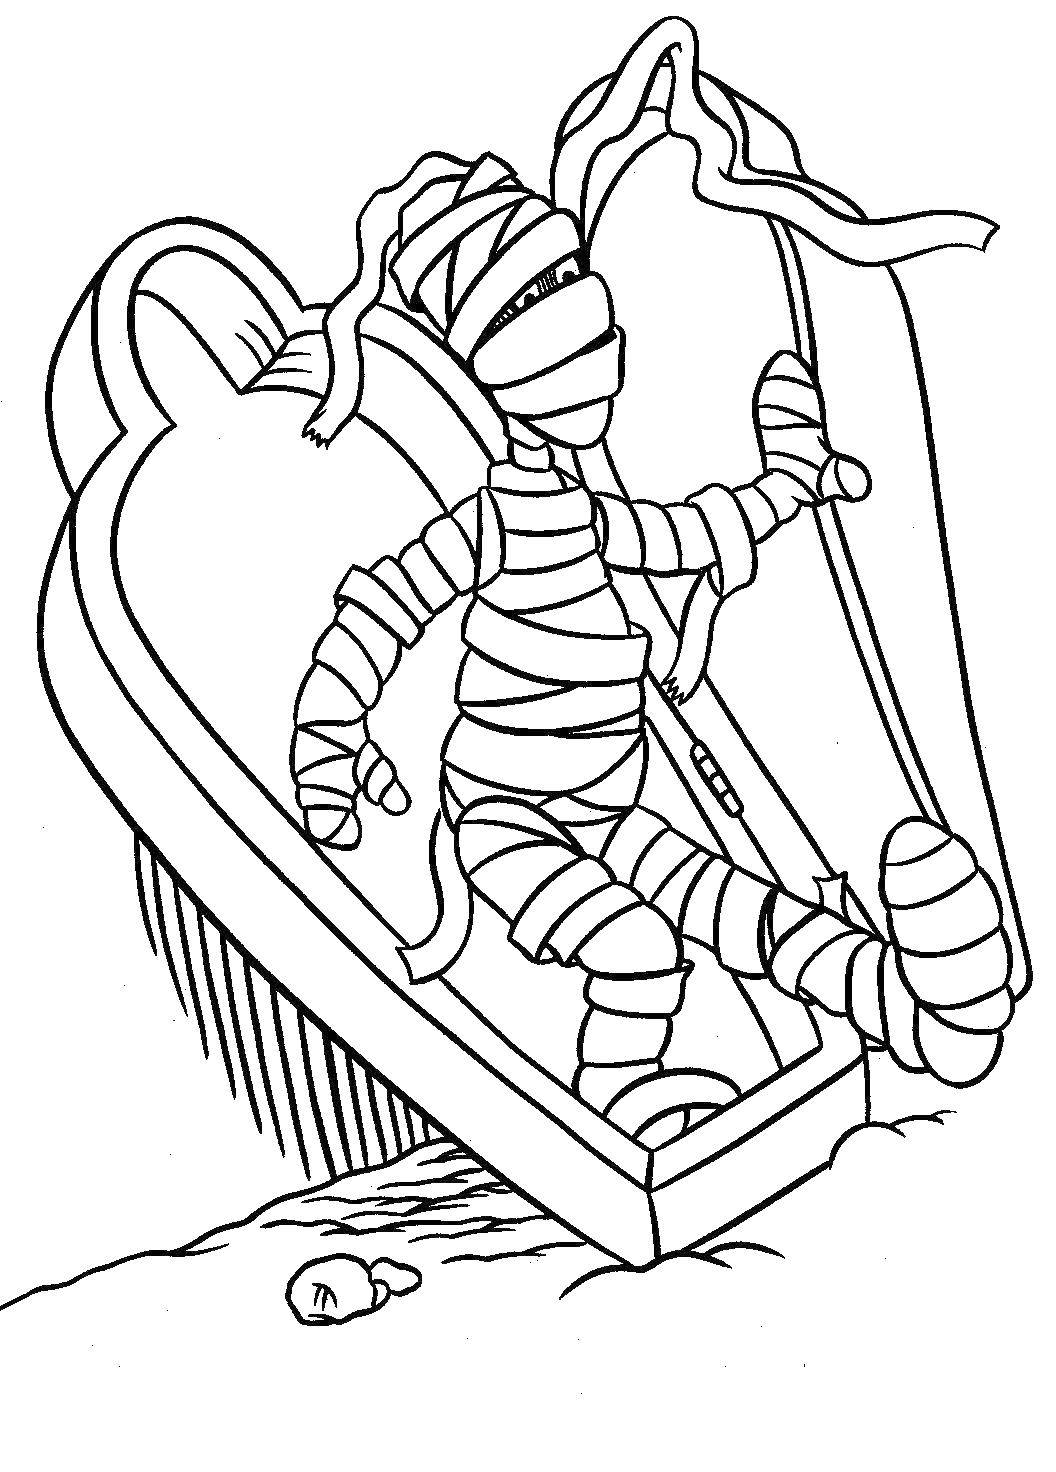 Coloring Mummy rose. Category The mummy. Tags:  The mummy.